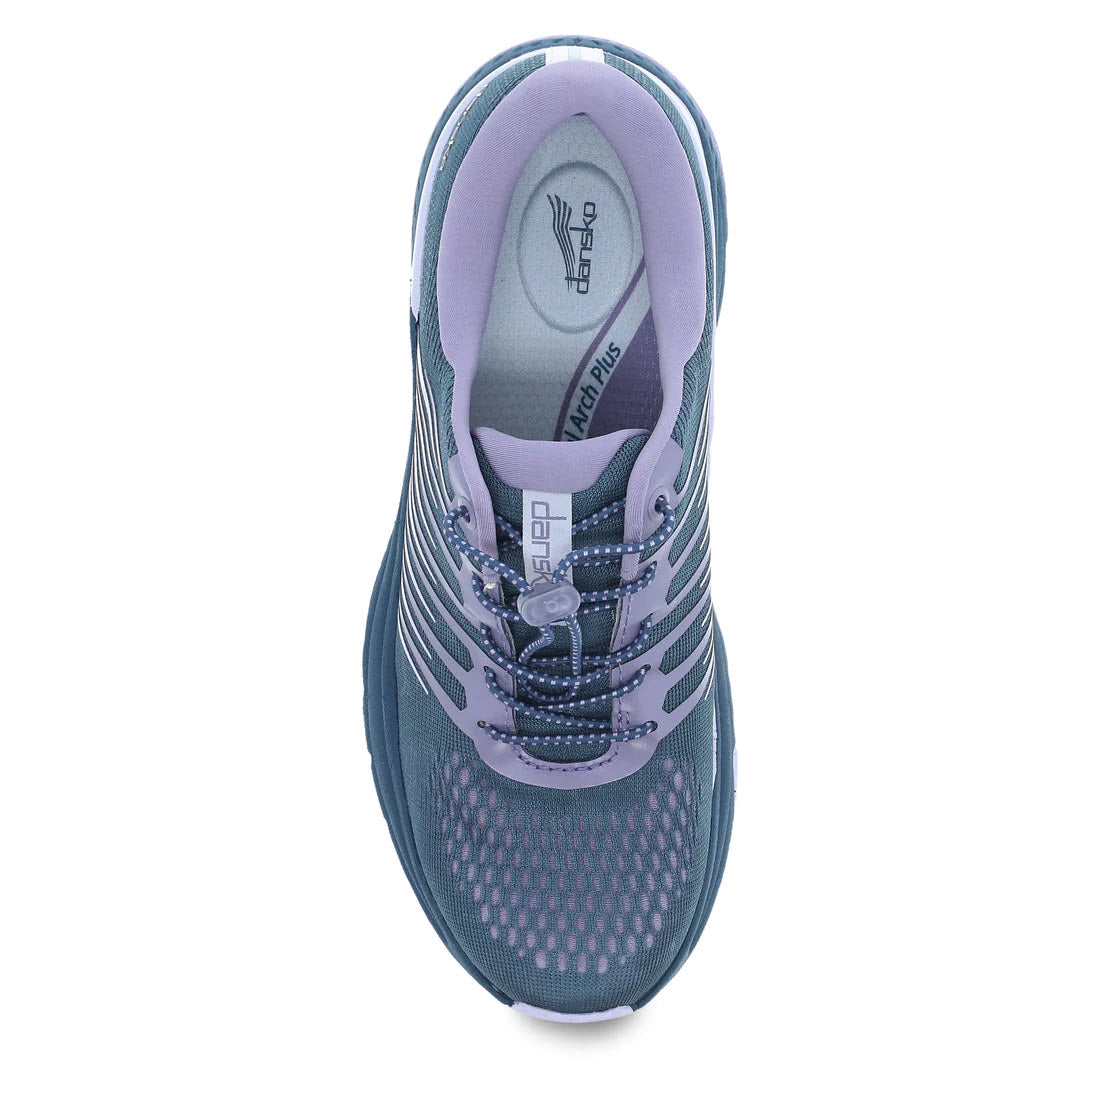 Top view of a sporty walking sneaker with a mesh upper in shades of blue and purple. The shoe has laces, features Dansko branding on the insole and tongue, and includes a supportive footbed for added comfort. The sneaker is the DANSKO PENNI DENIM MESH - WOMENS.